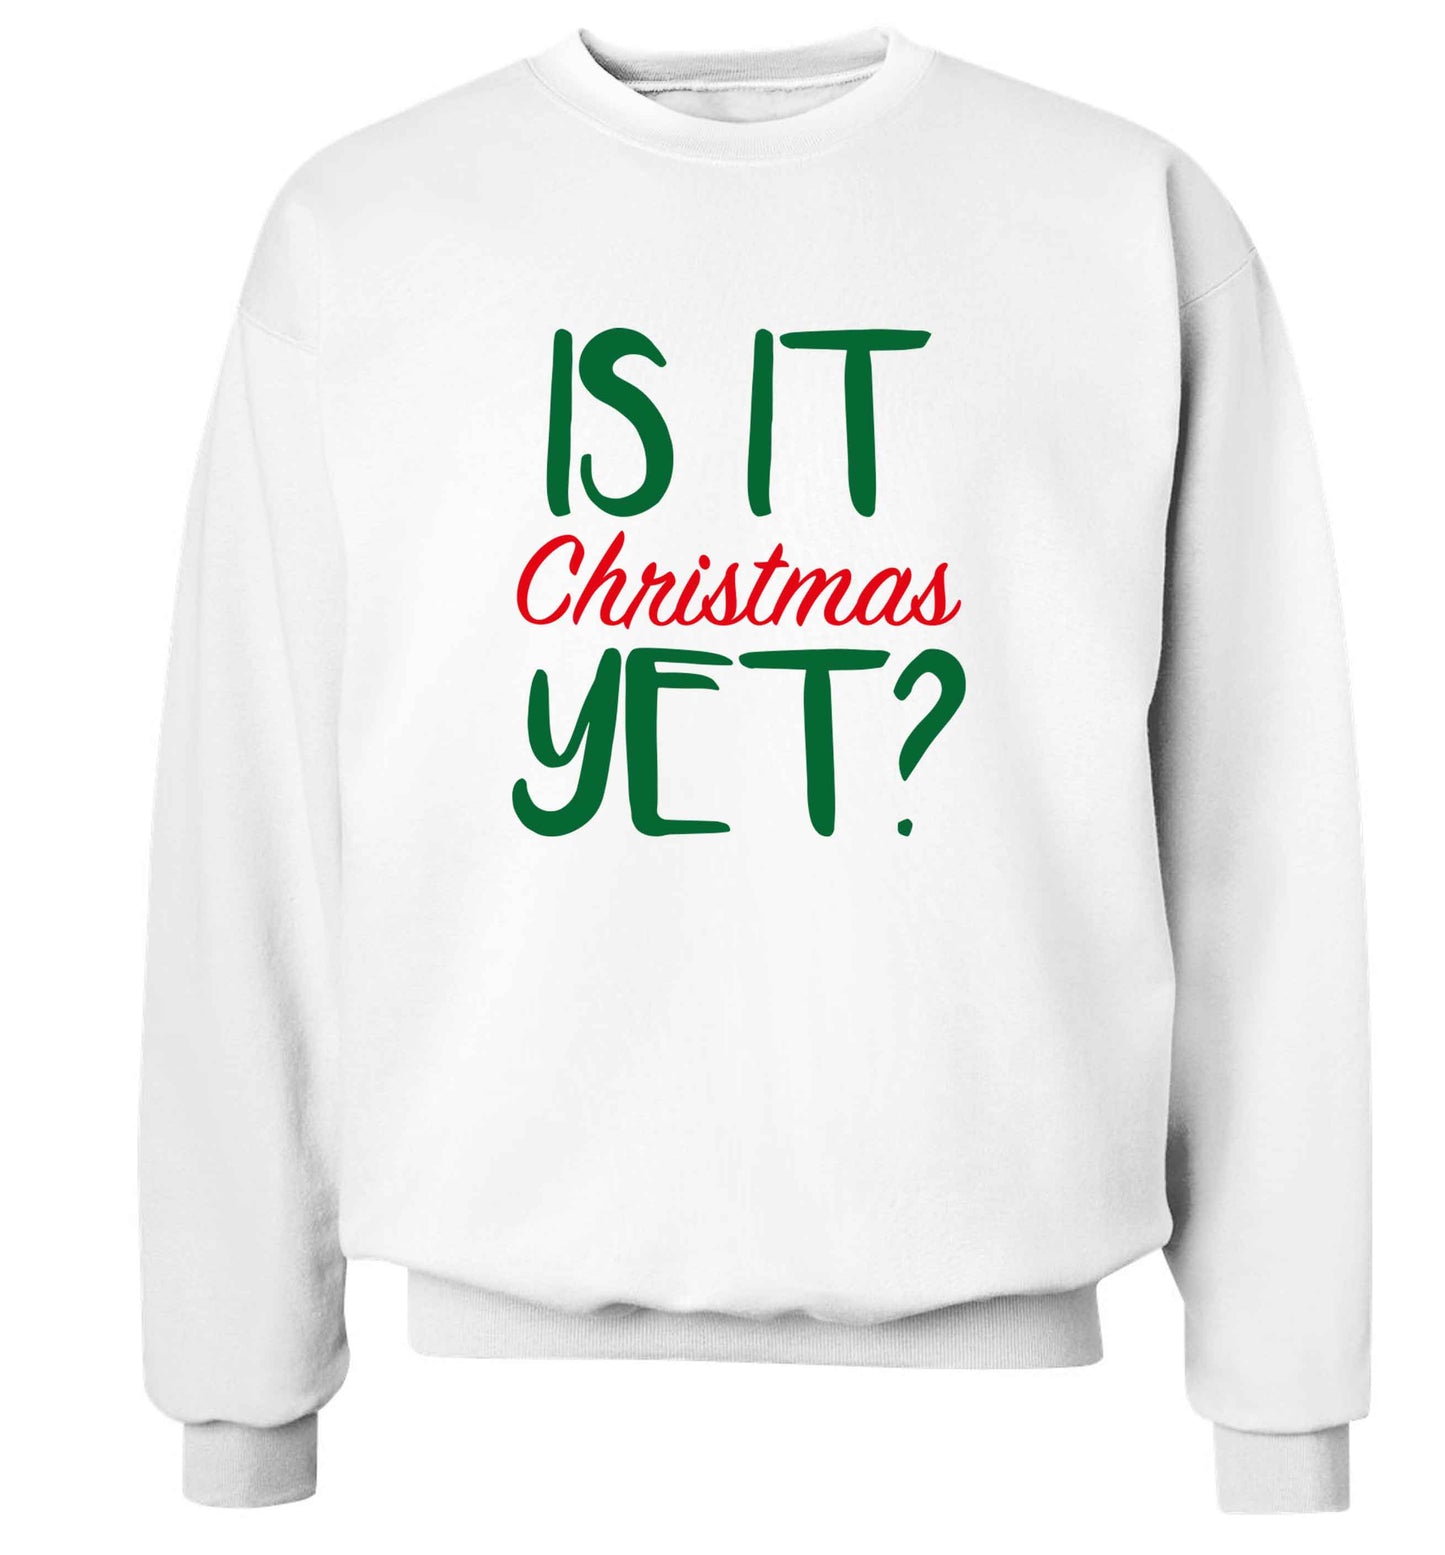 Is it Christmas yet? adult's unisex white sweater 2XL